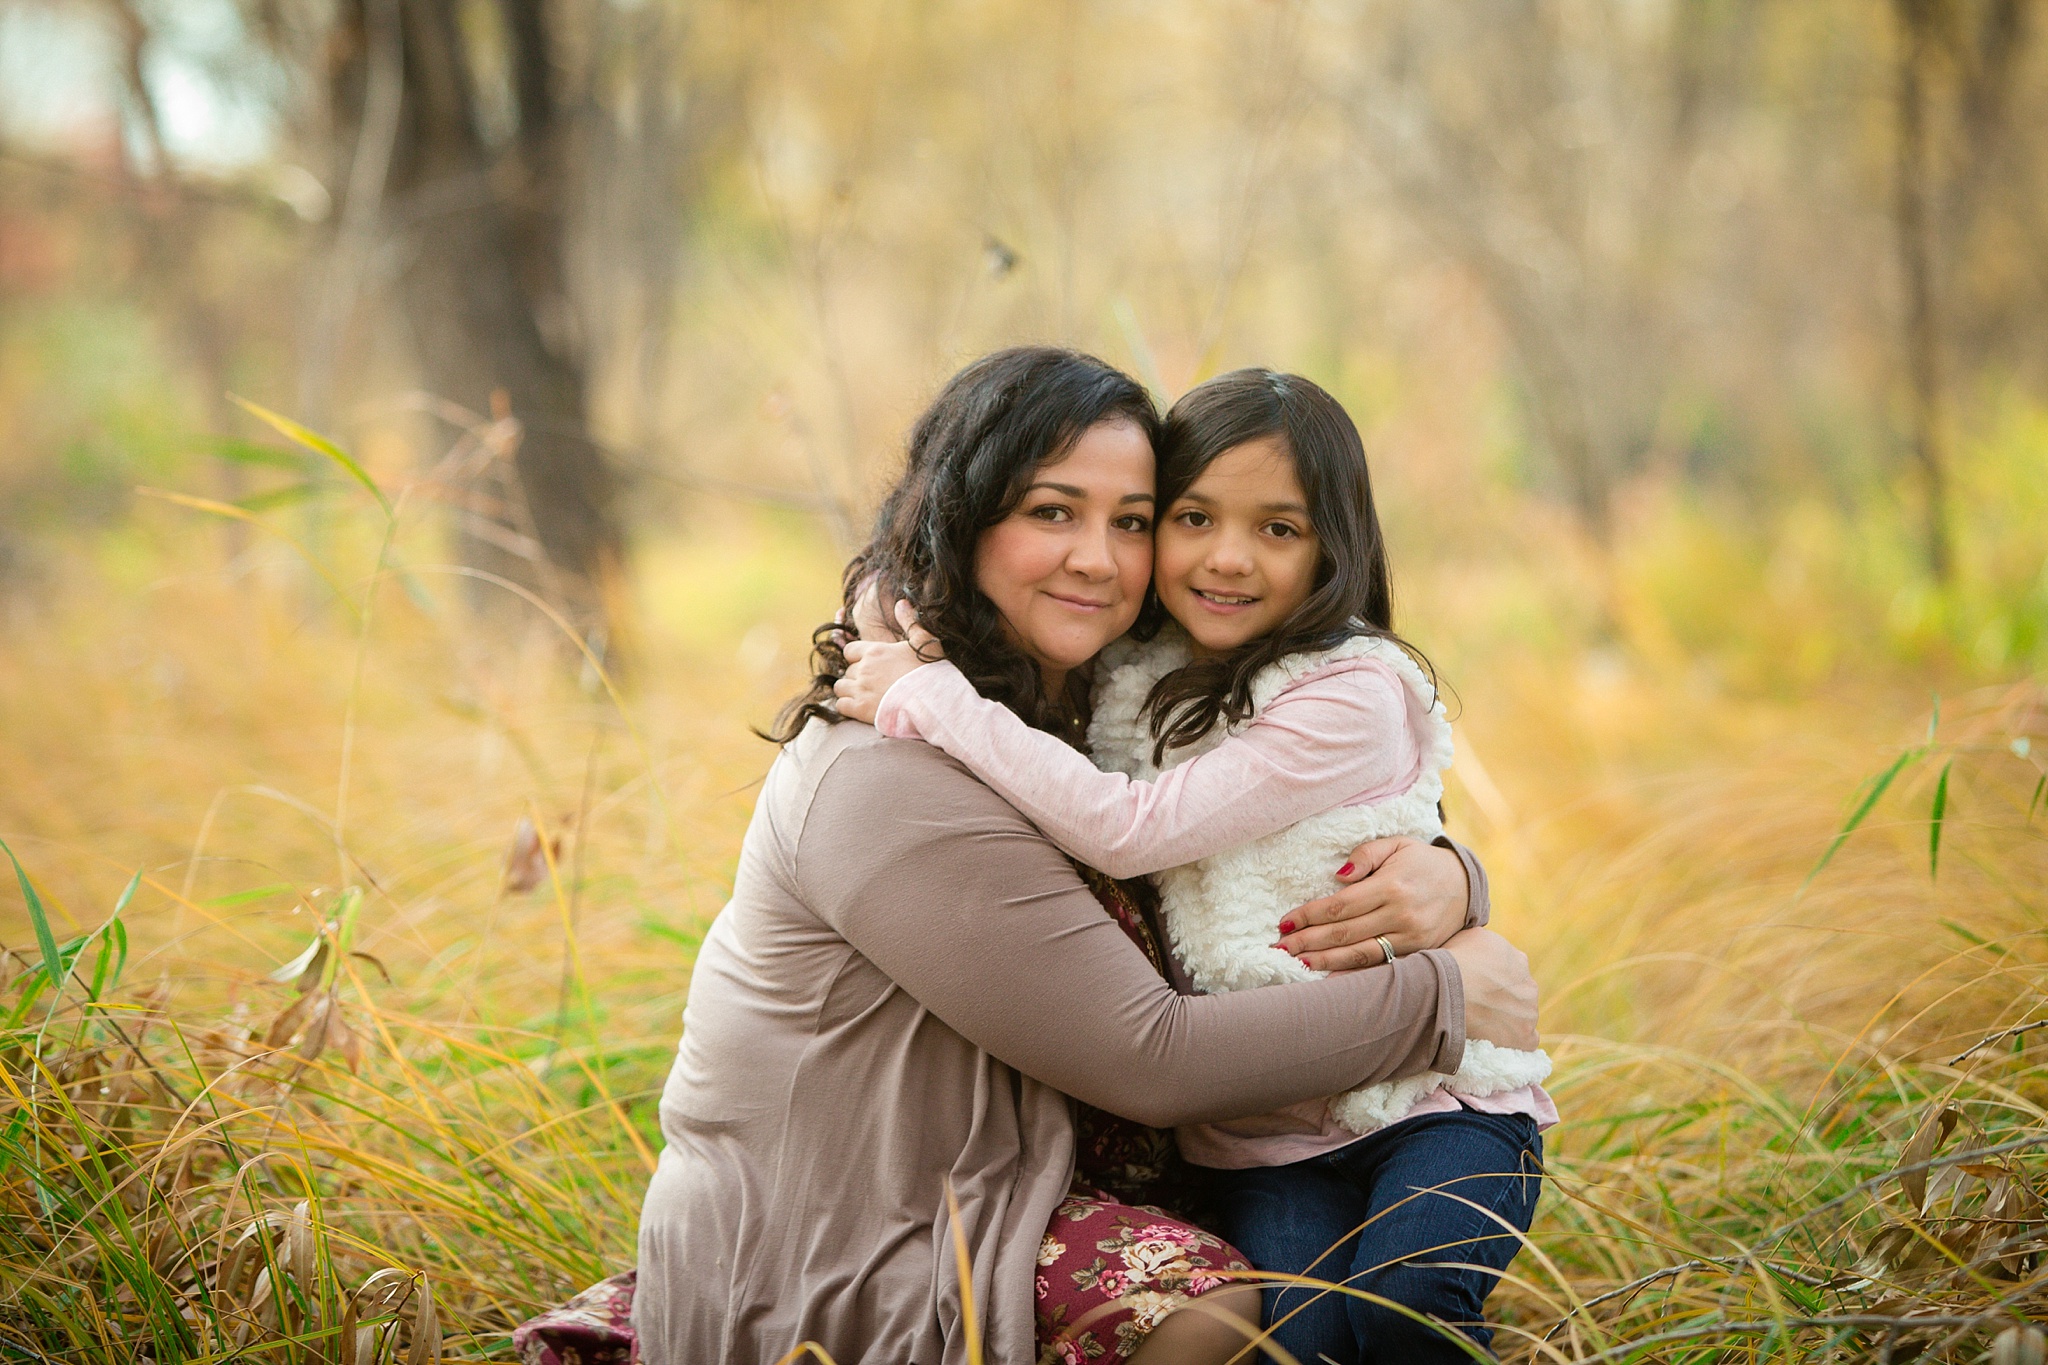 Mother & daughter hugging during fall family portraits. The Aguayo Family’s Fall Family Photo Session at Golden Ponds Nature Area by Colorado Family Photographer, Jennifer Garza. Golden Ponds Nature Area Family Photographer, Golden Ponds Nature Area, Golden Ponds, Golden Ponds Family Photographer, Longmont Family Photography, Longmont Family Photographer, Colorado Family Photos, Colorado Family Photographer, Colorado Fall Photos, Fall Photos